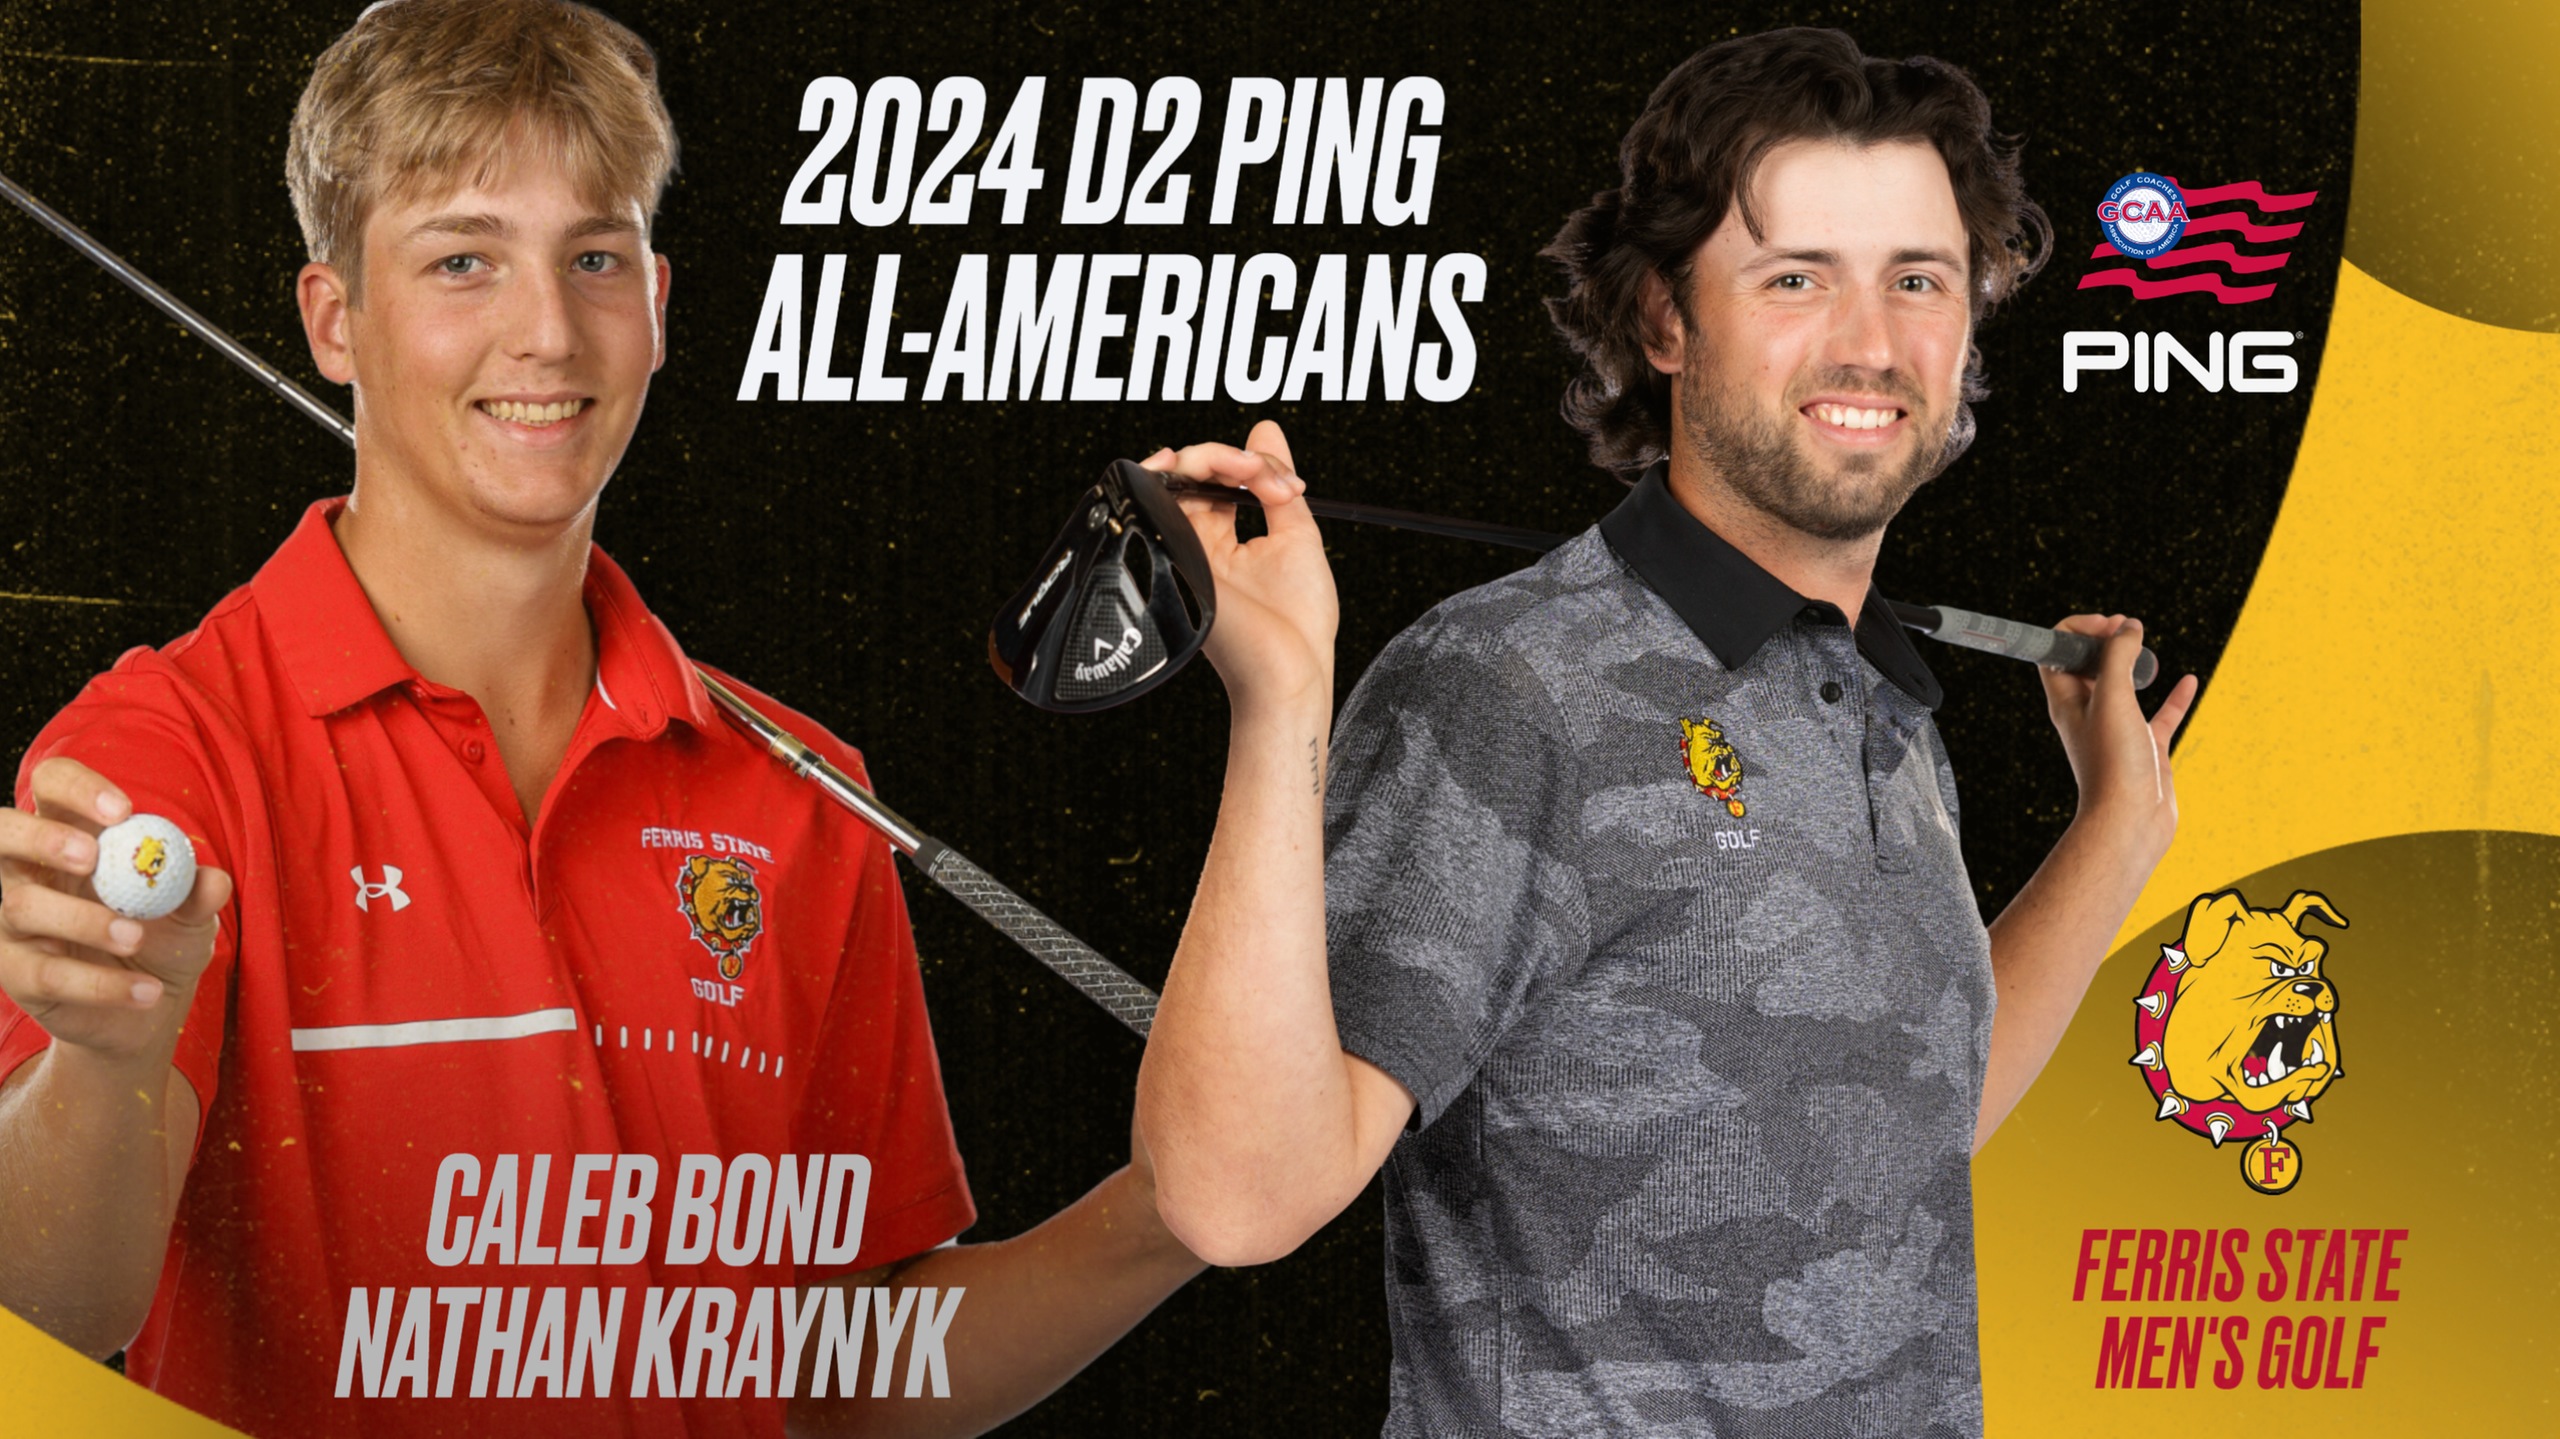 Ferris State Men's Golf Standouts Earn D2 PING All-America Recognition